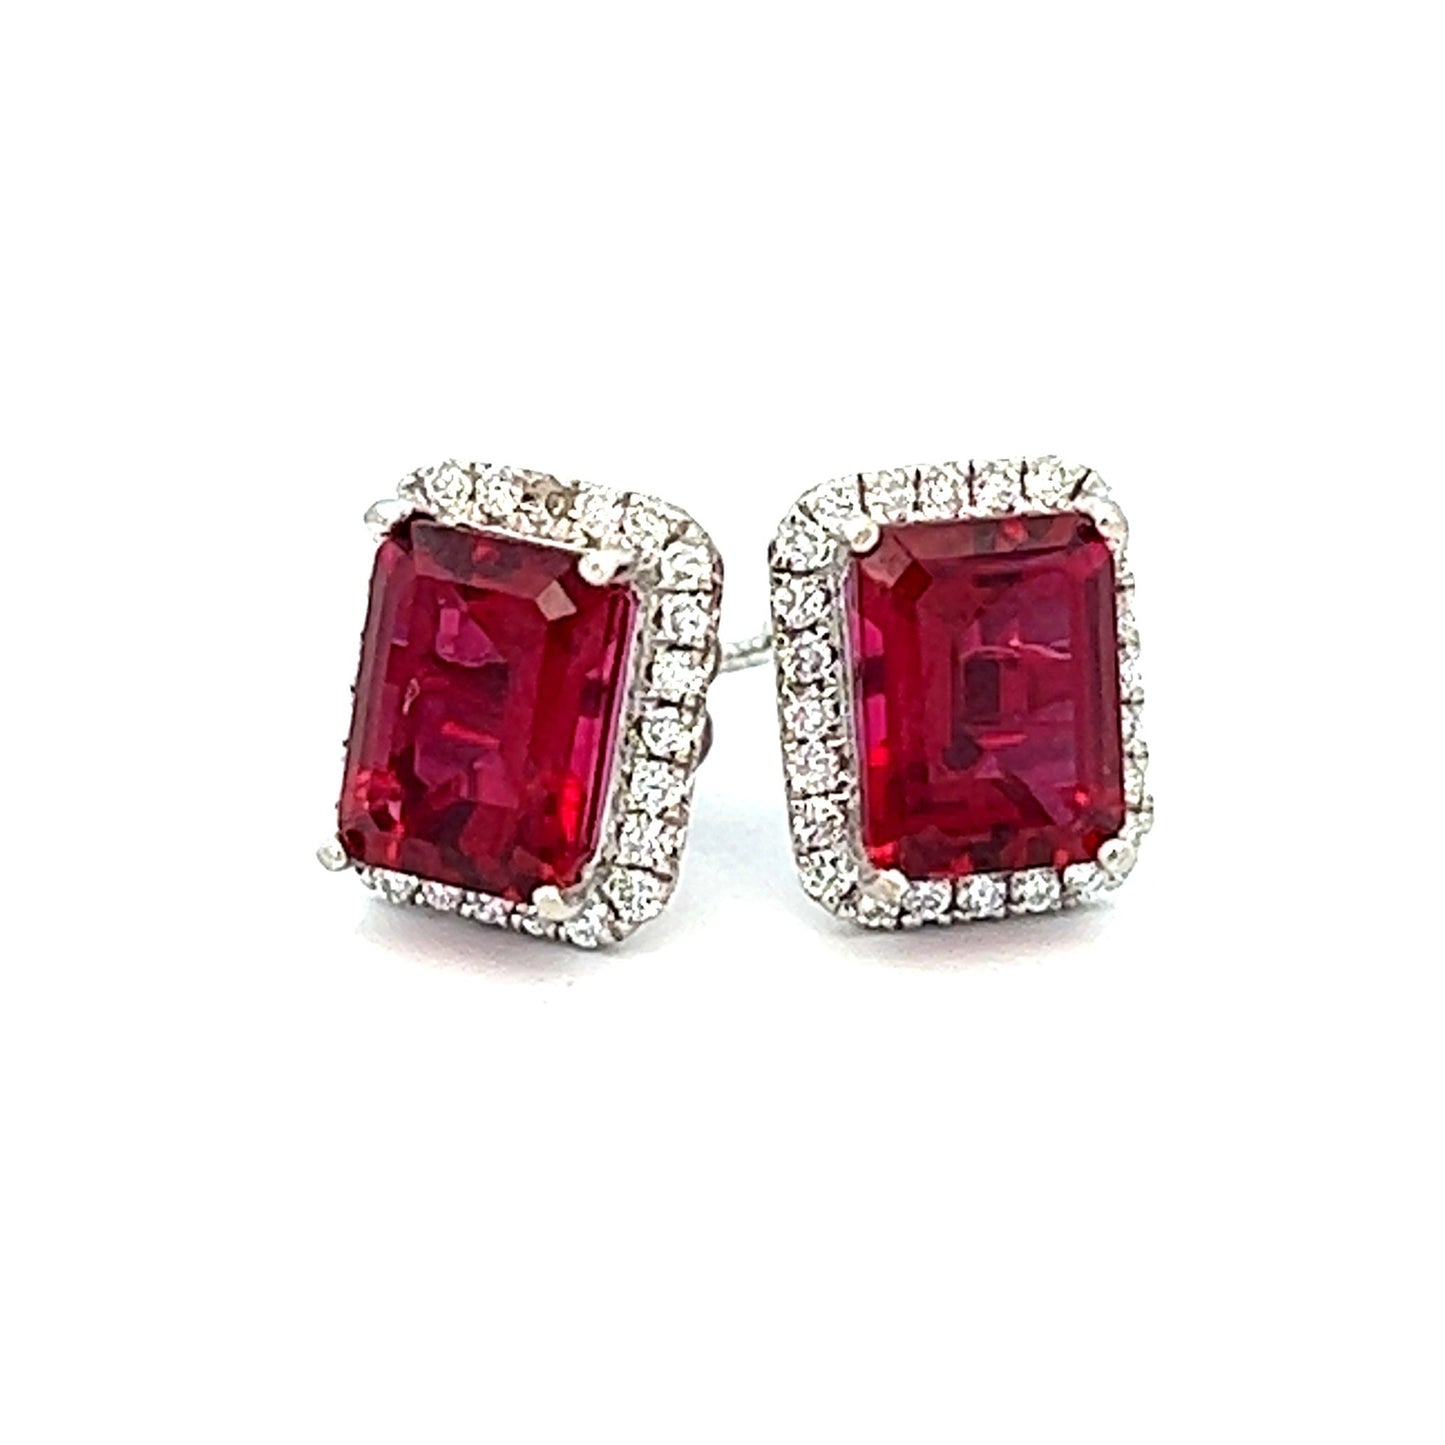 4.68 Ruby and Diamond Earrings in 14k White Gold